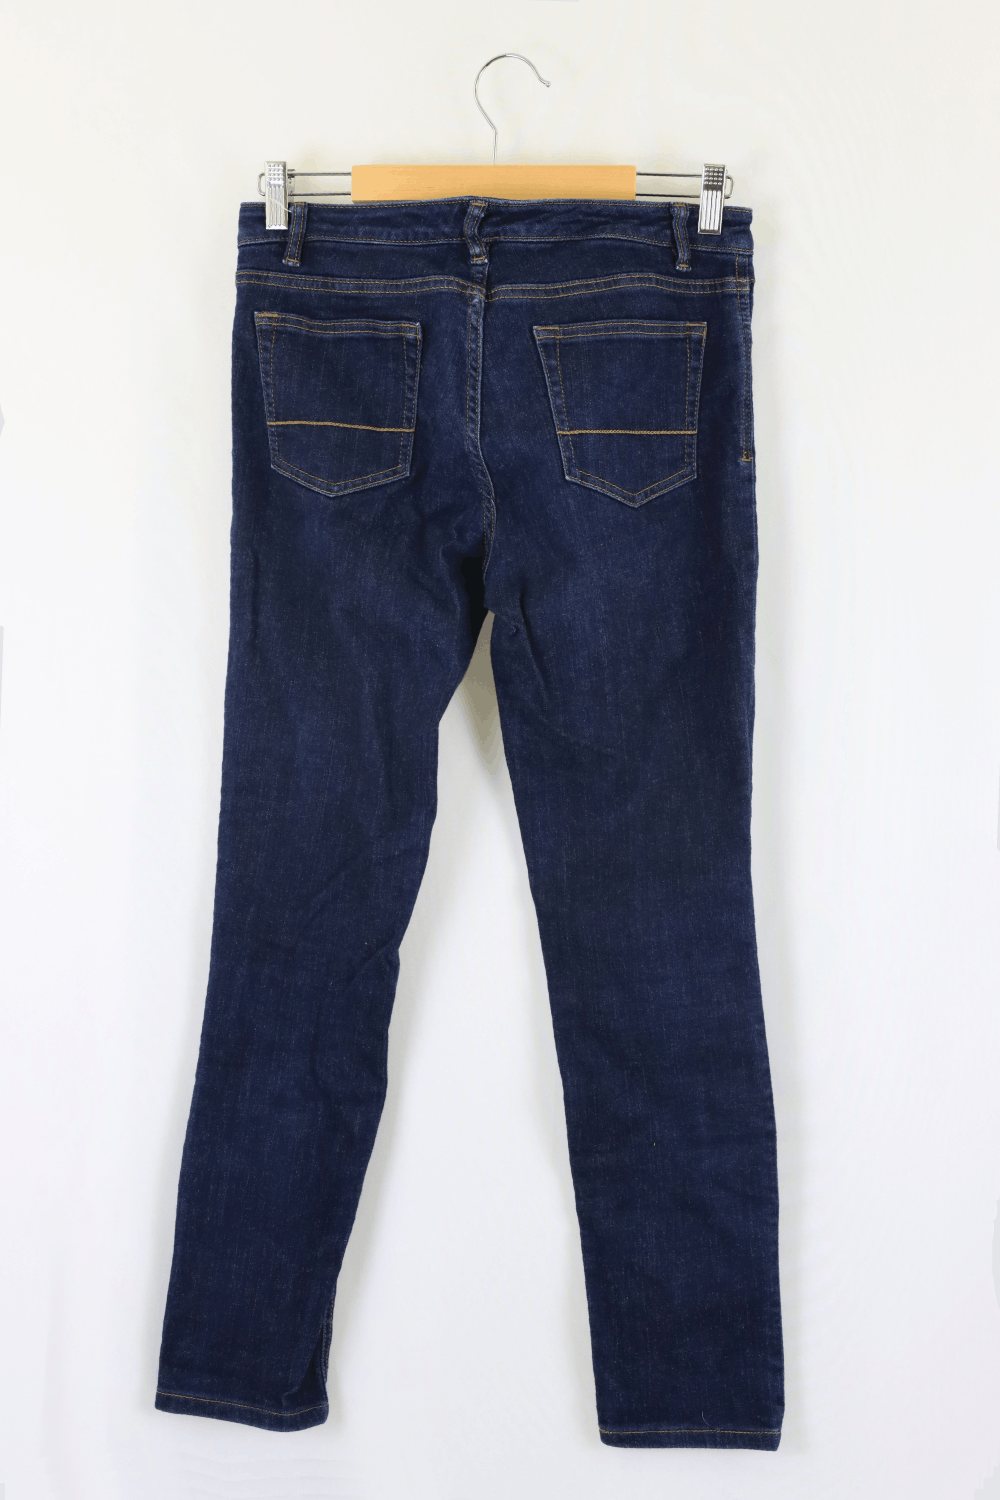 Trenery Blue Jeans 10